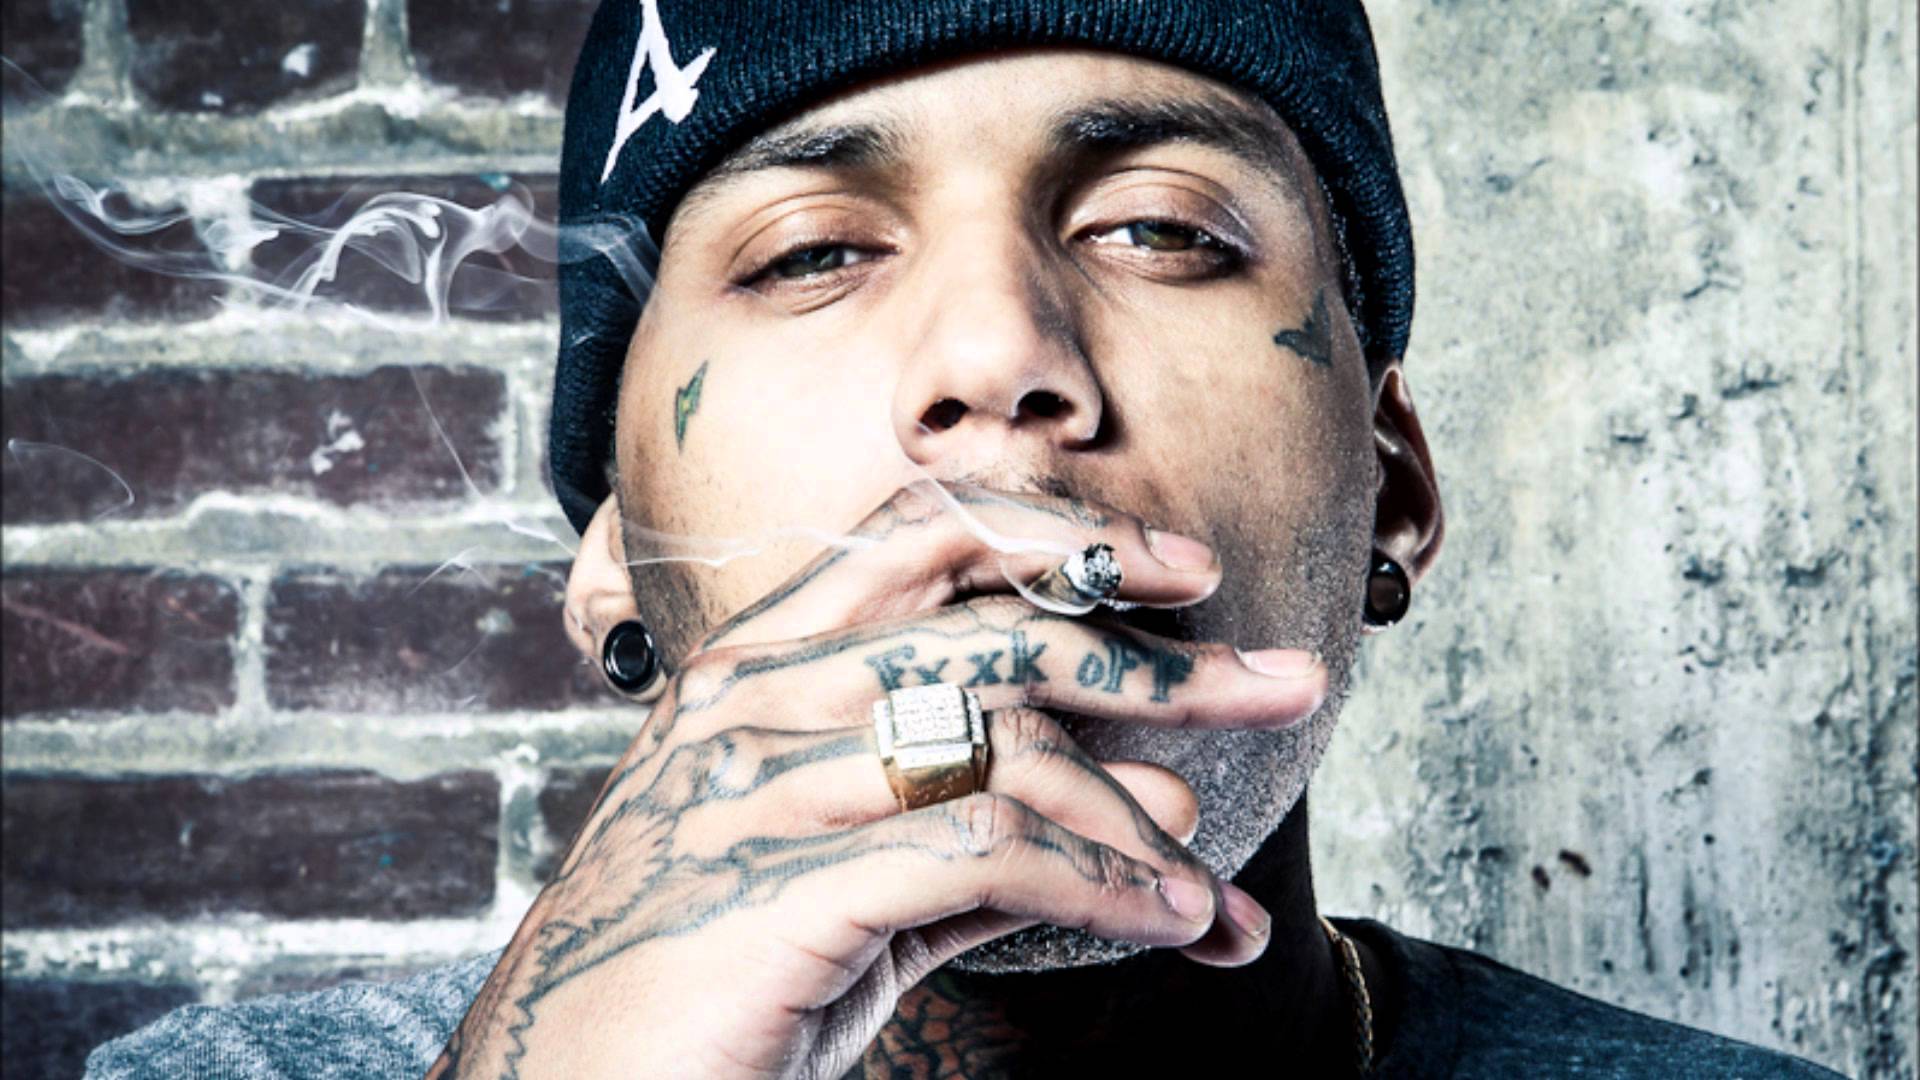 Kid Ink Wallpaper For Iphone